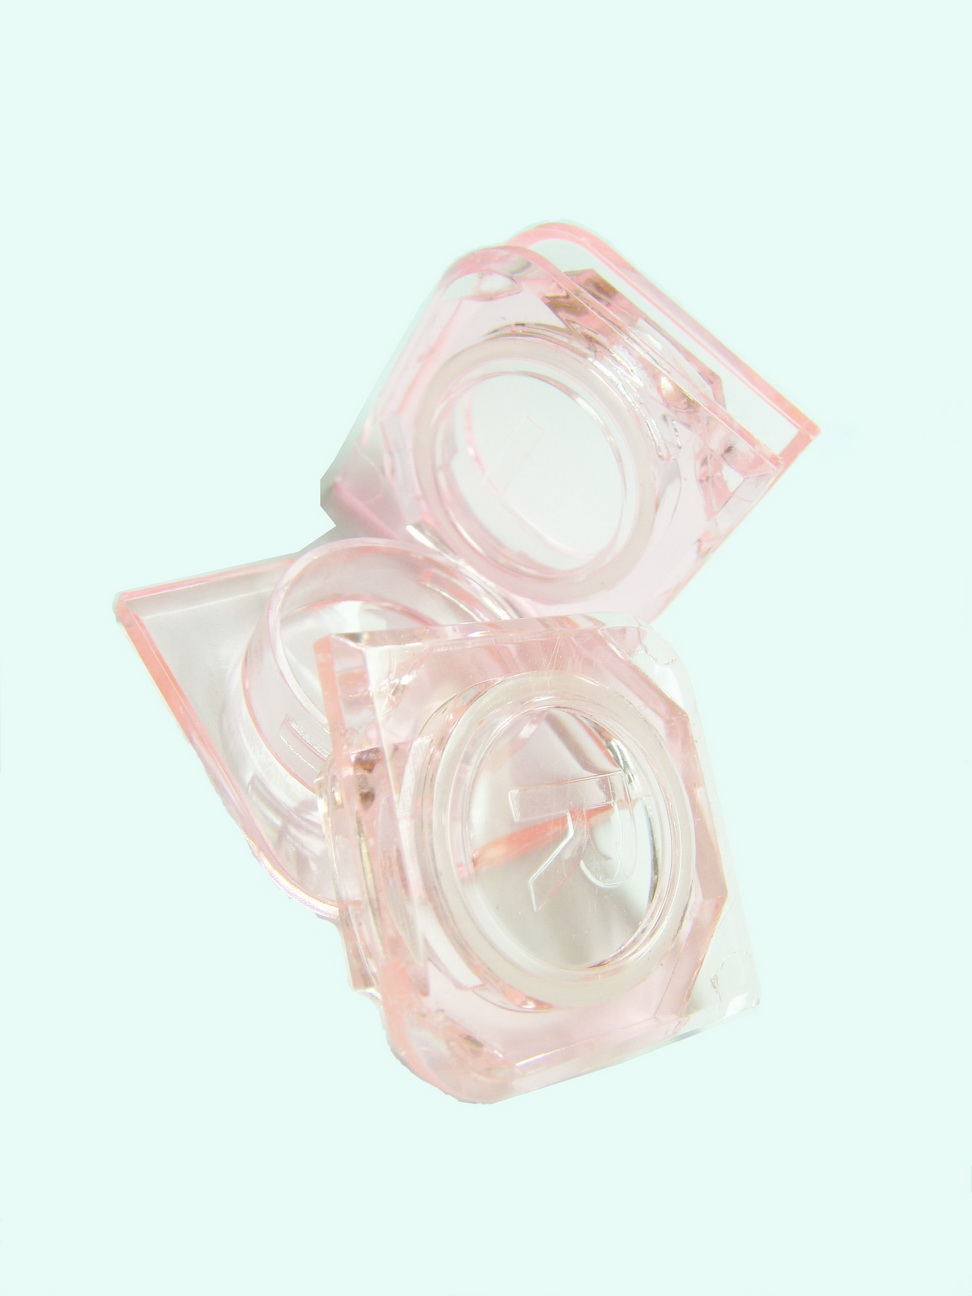 SMART DESIGN SEPARATE GLASS PINK COLOR CARRY ON CONTACT LENS SOAKING CASES